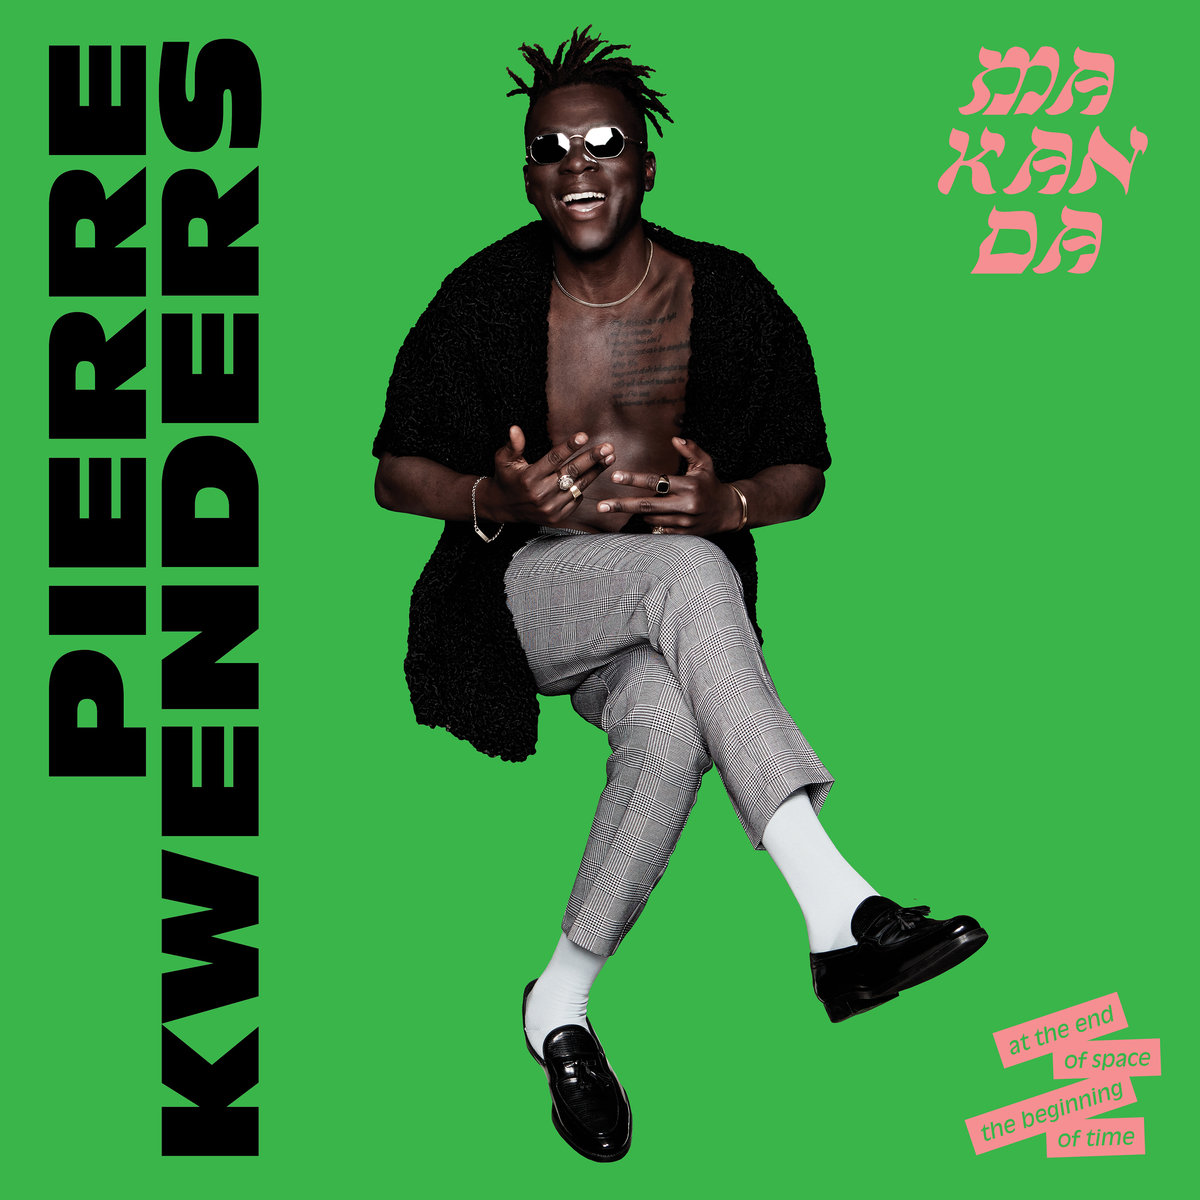 PIERRE KWENDERS / ピエール・クウェンダース / MAKANDA AT THE END OF SPACE, THE BEGINNING OF TIME